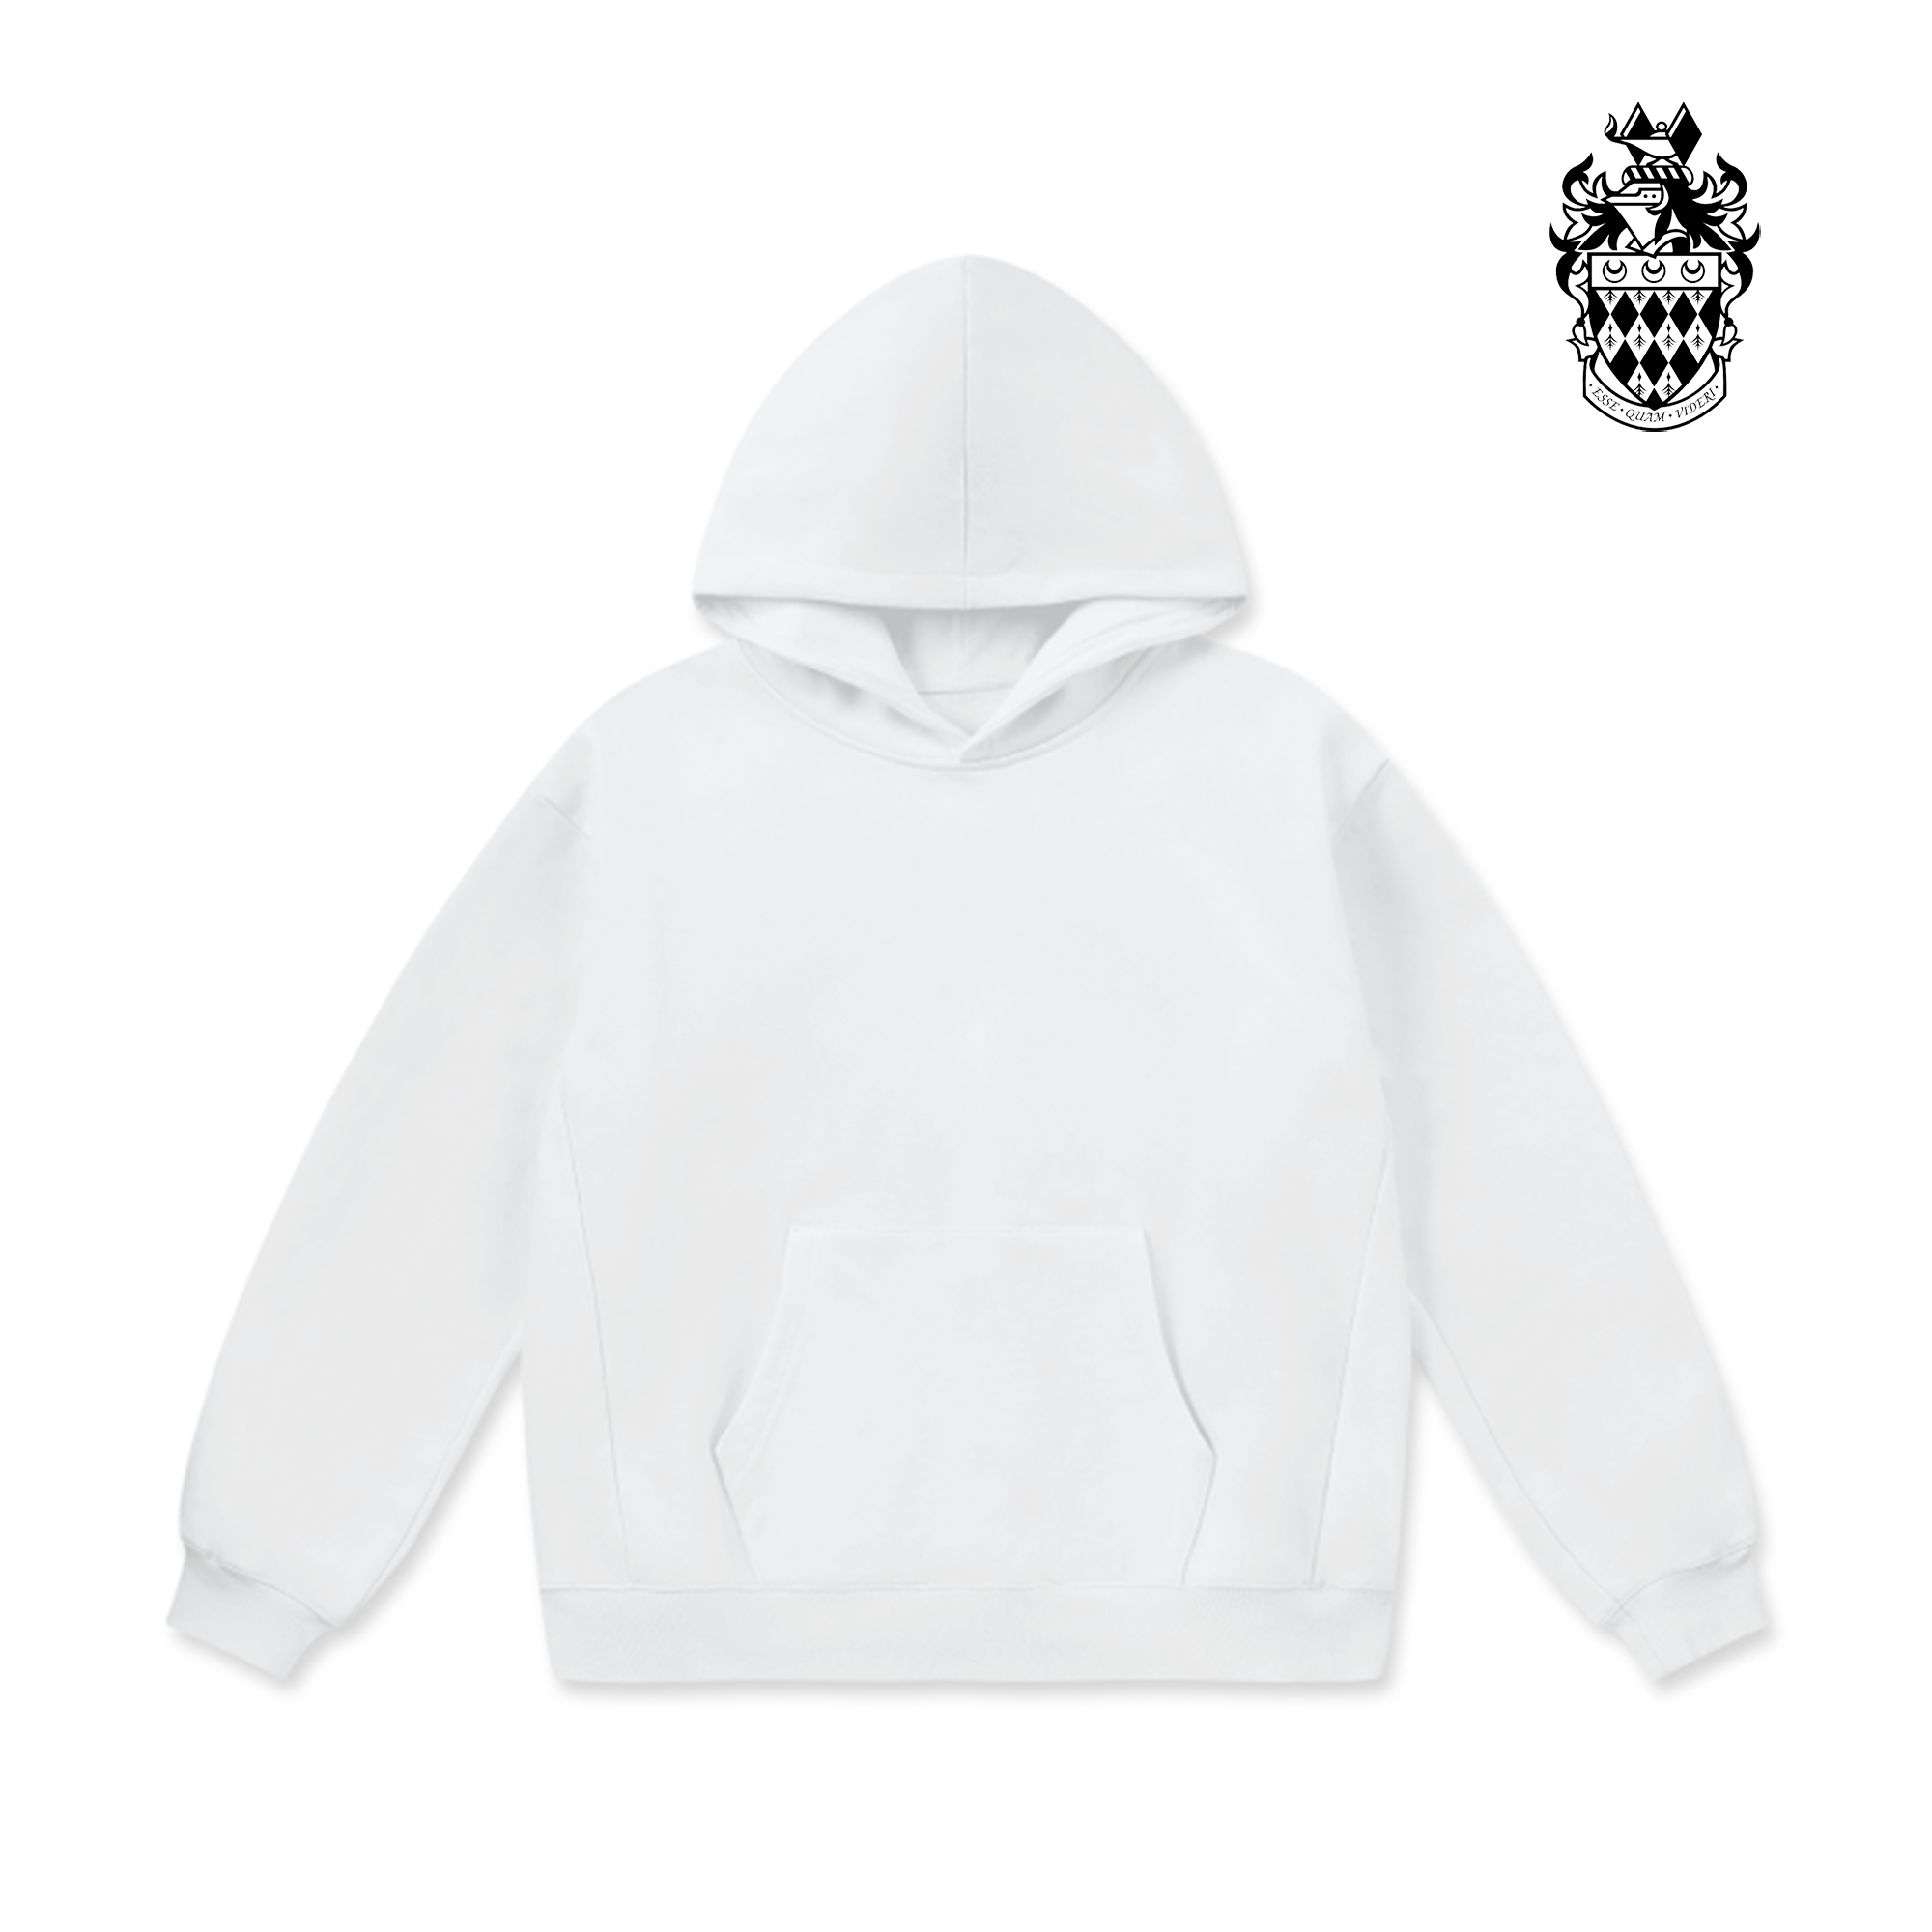 LCC Super Weighted Hoodie - Royal Holloway University of London (Classic)